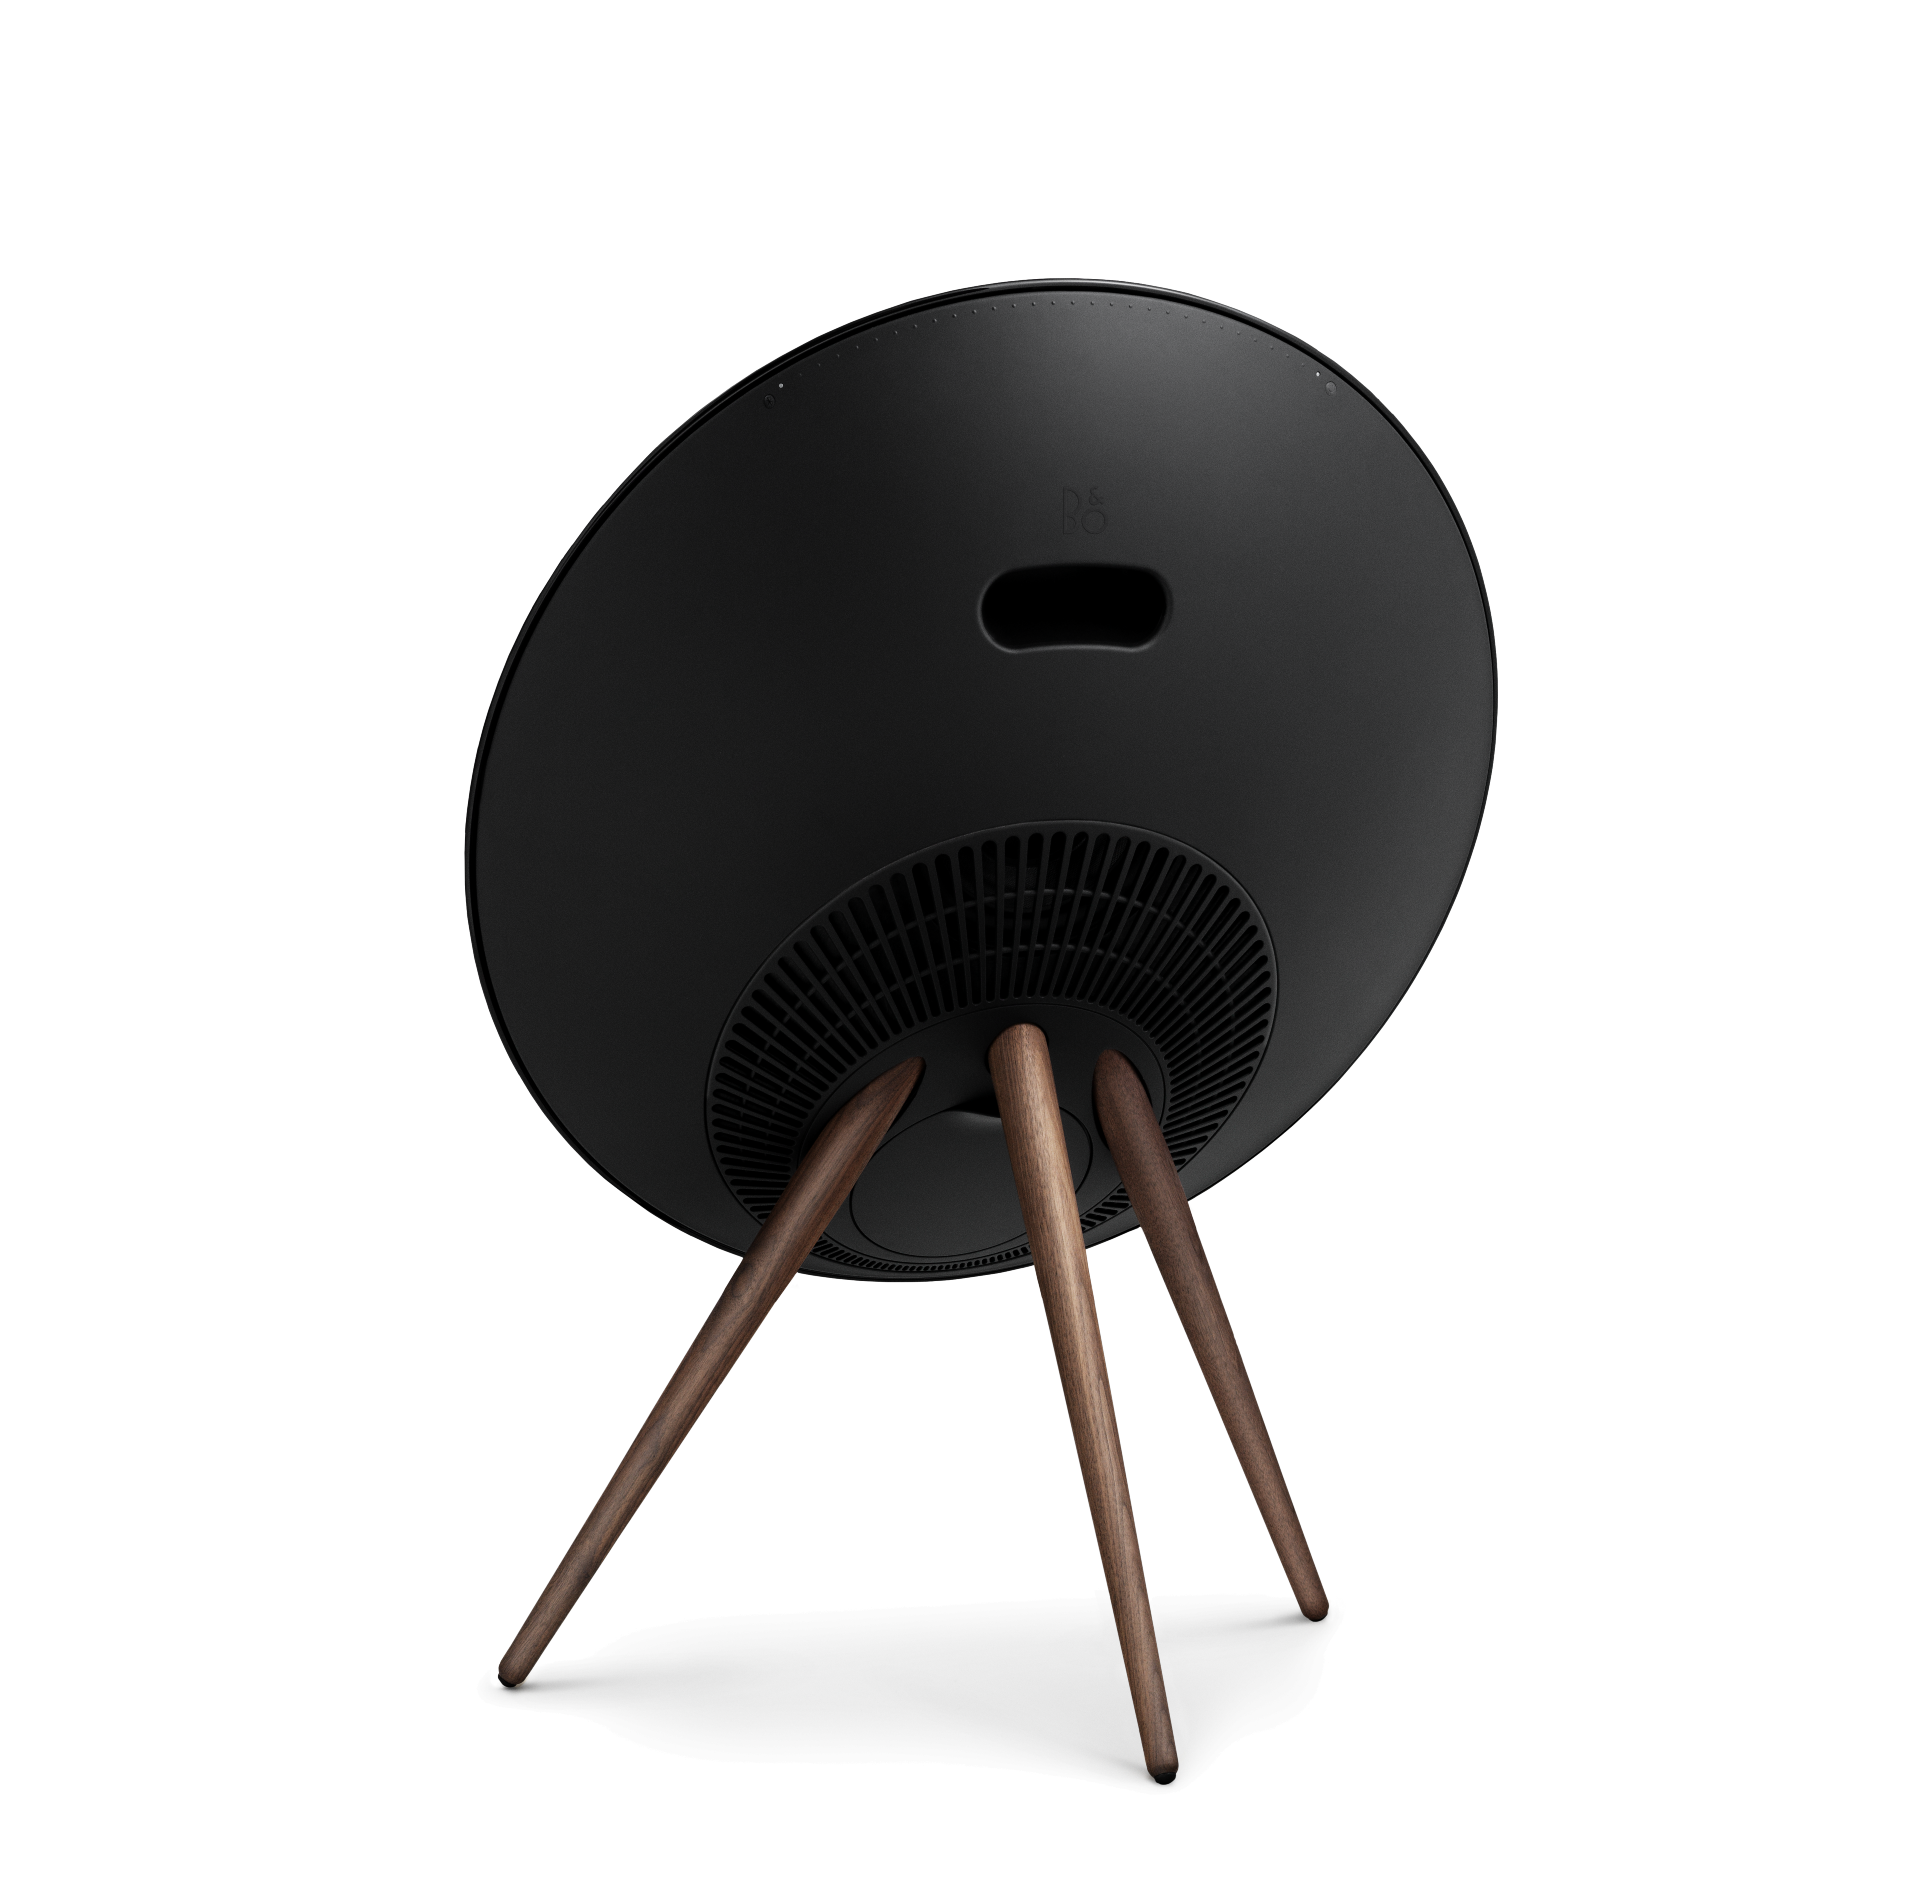 BEOPLAY A9